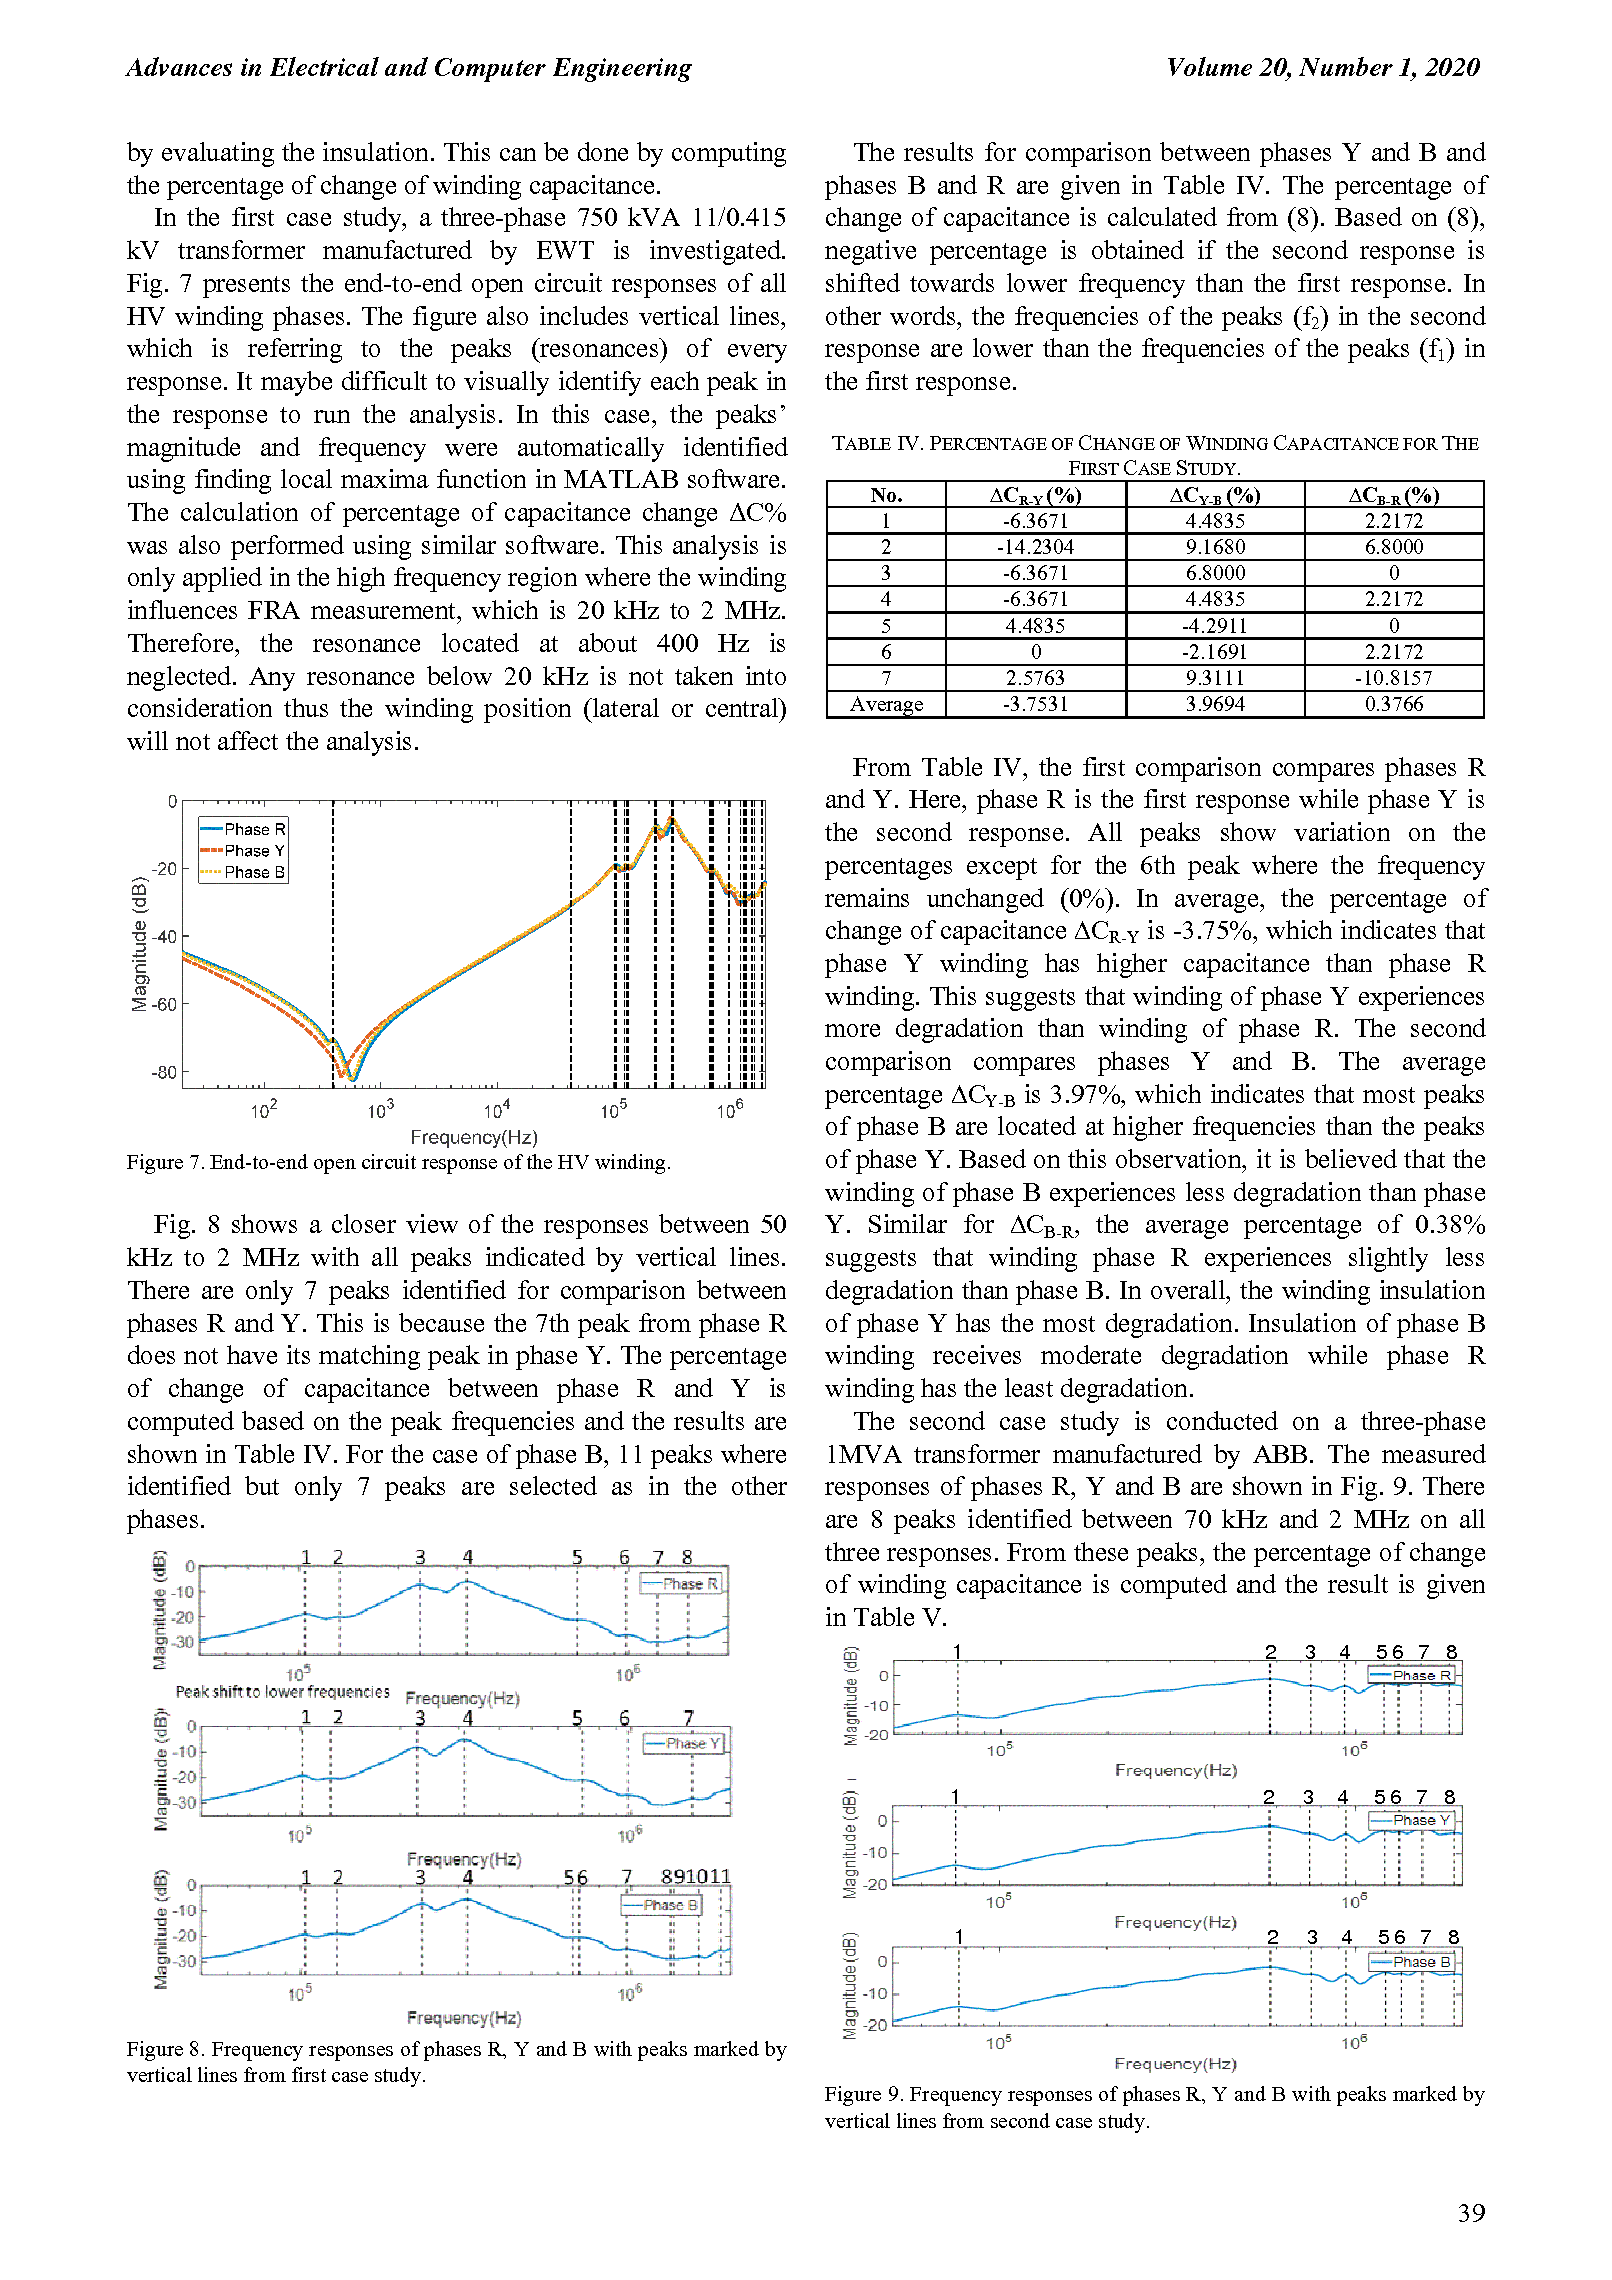 PDF Quickview for paper with DOI:10.4316/AECE.2020.01005